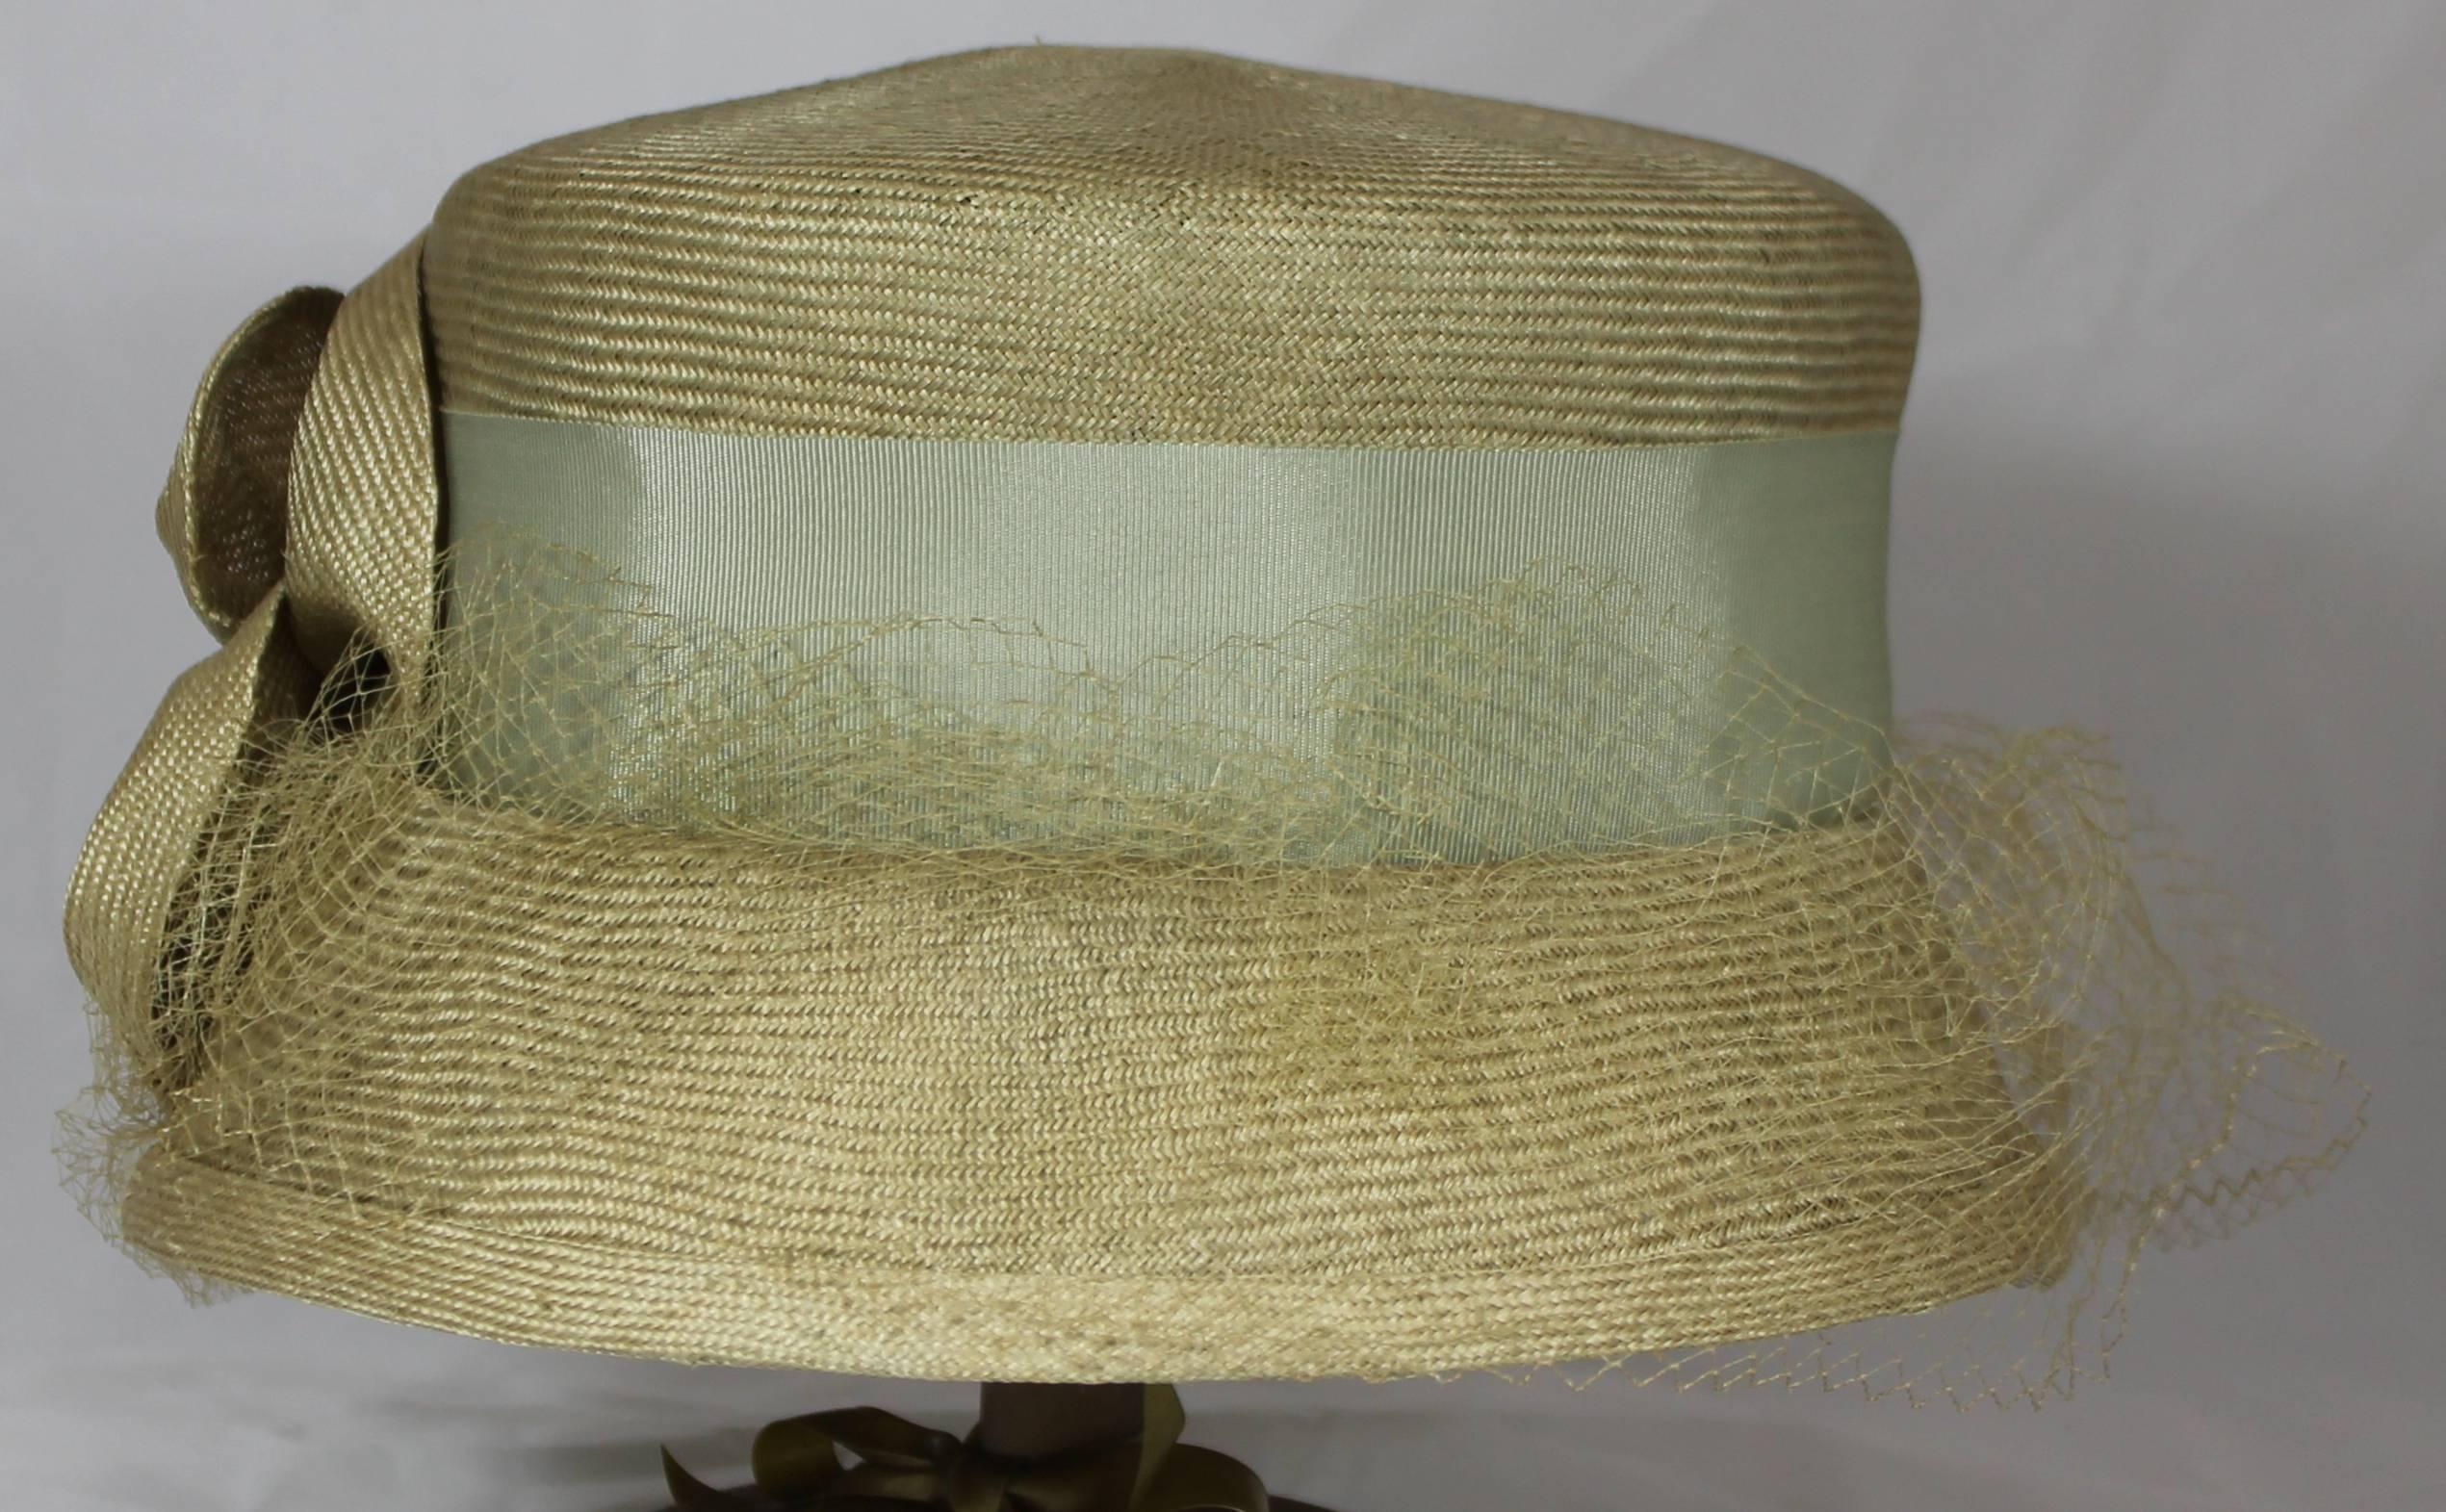 Suzanne Couture Millinery Light Olive Straw Hat with Ribbon, Flower, and Net. This hat is made of straw-like material. It is a light olive color and has a blueish green ribbon around it. There is a large light olive flower wit a button in the middle